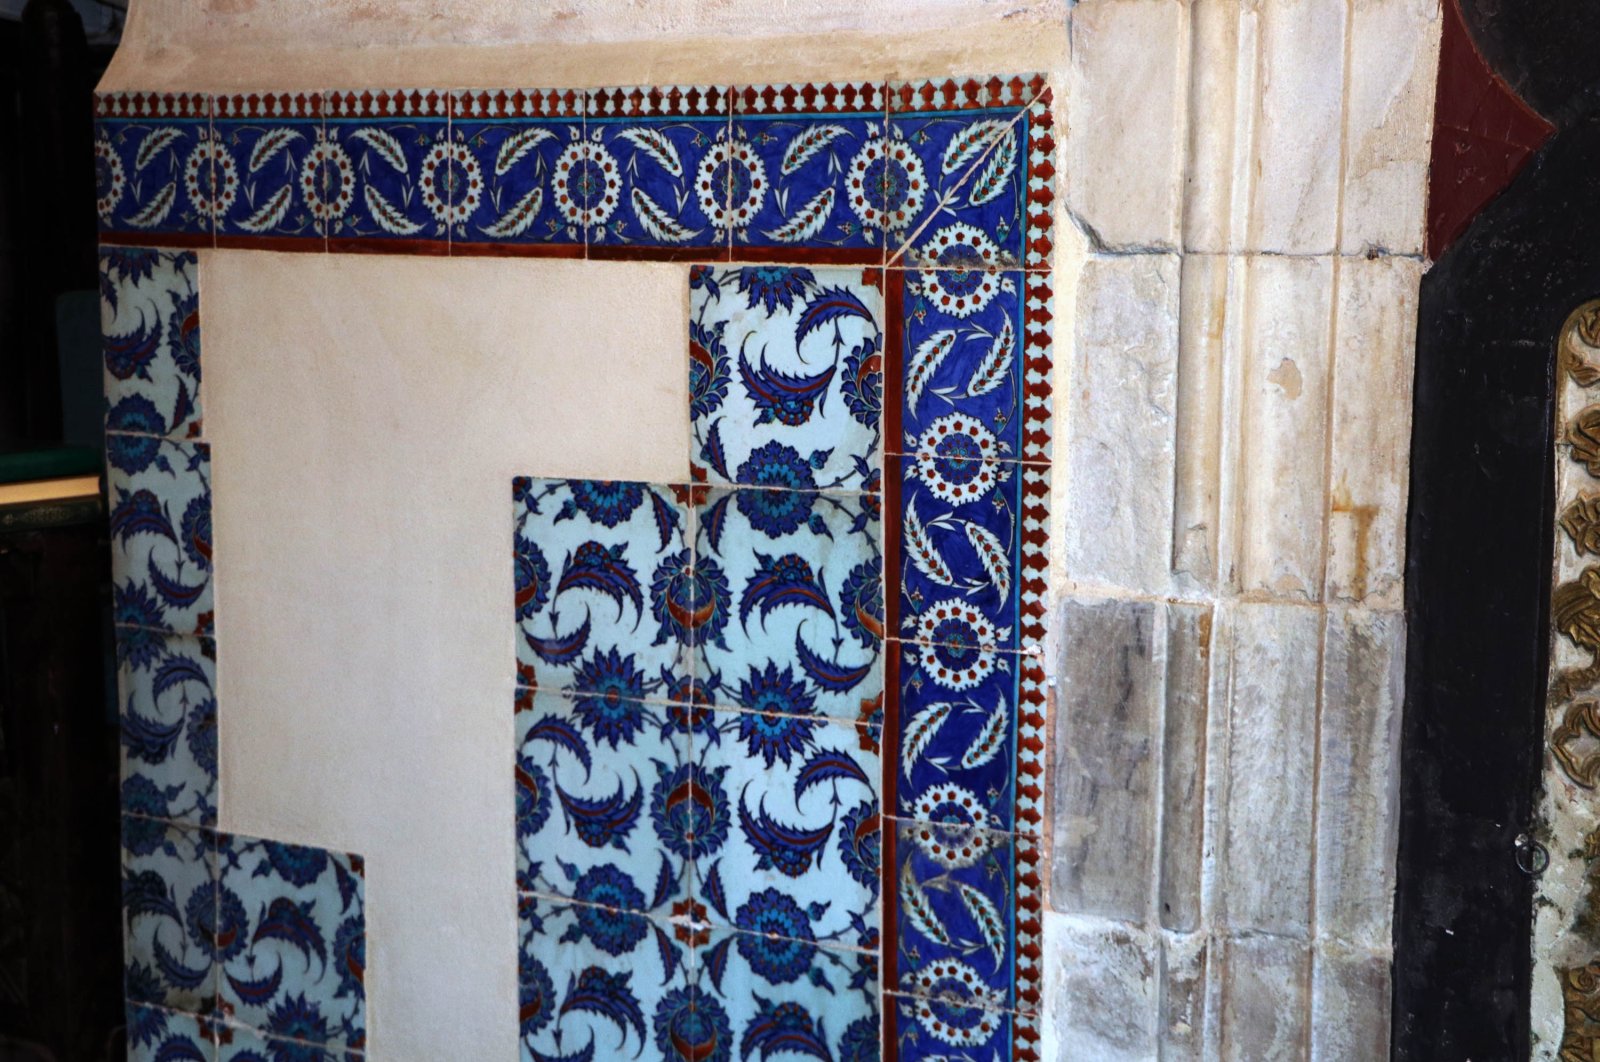 The gap left by stolen tiles from the wall of the Ulu Mosque in Adana, southern Turkey, April 13, 2021. (DHA PHOTO)